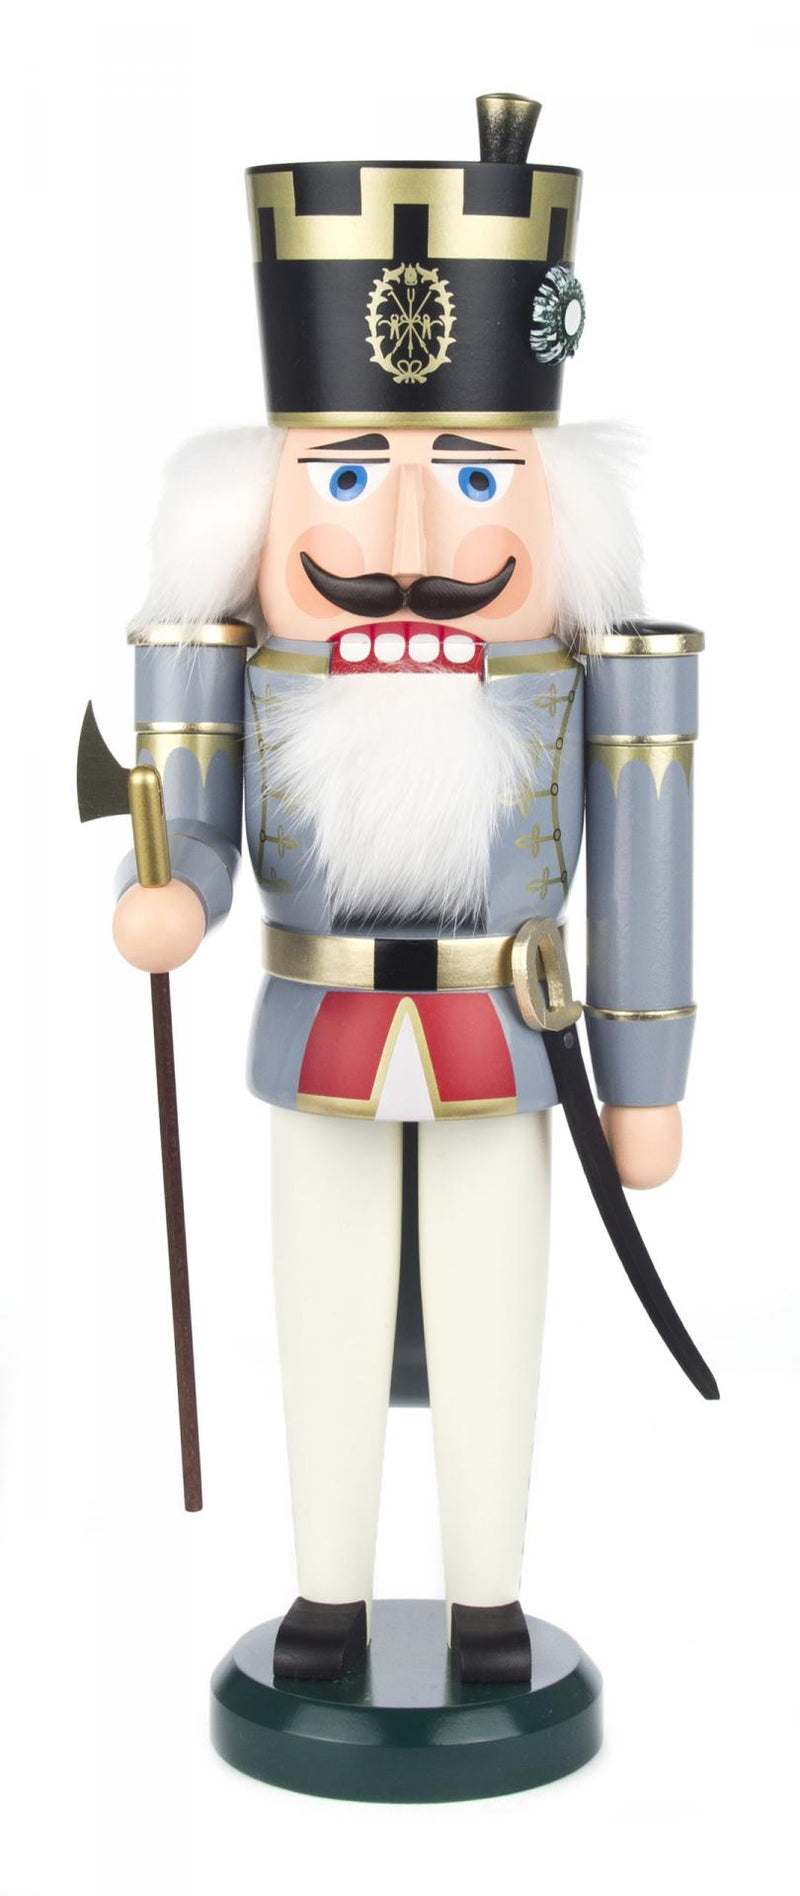 003/105 - Officer Nutcracker with Grey & Red Accents